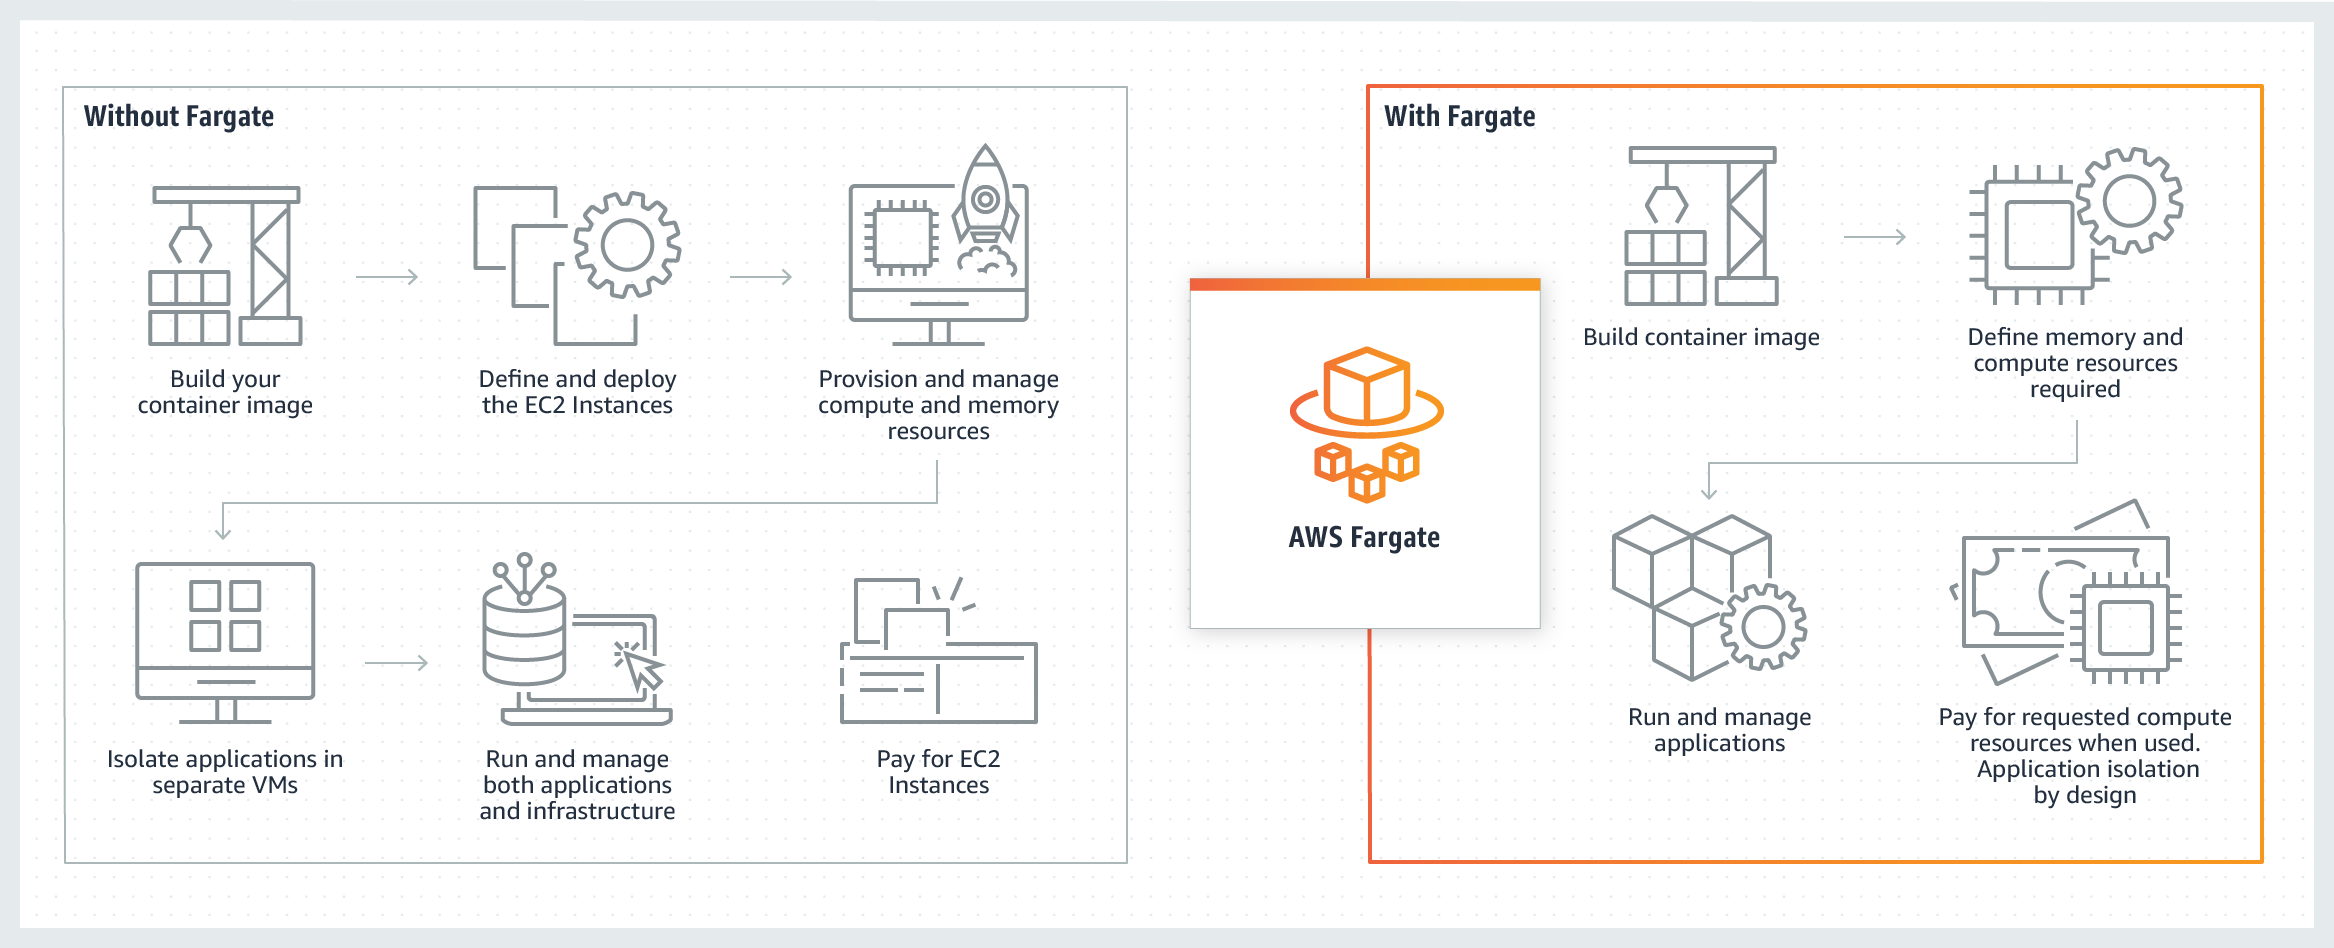 AWS Fargate process diagram, showing how serverless functions in the AWS cloud.